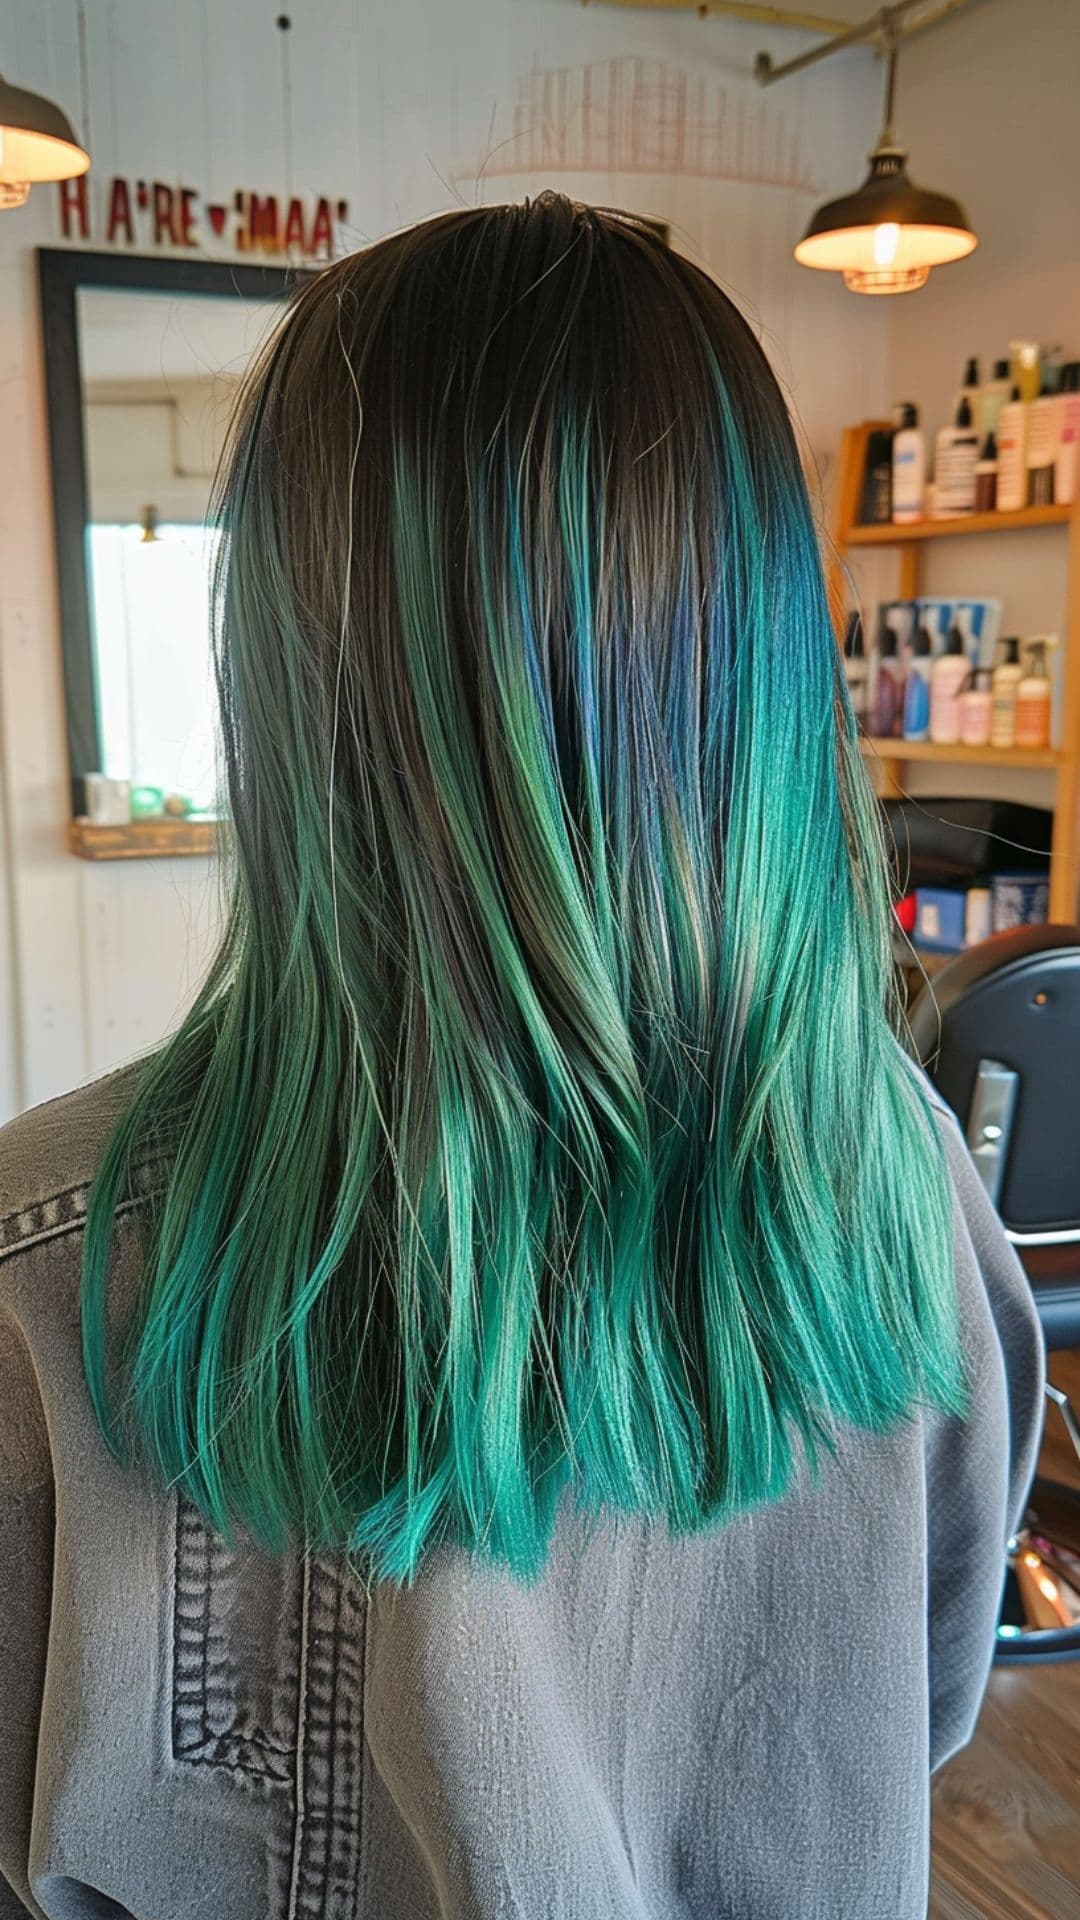 A woman modelling a teal ombre hair.